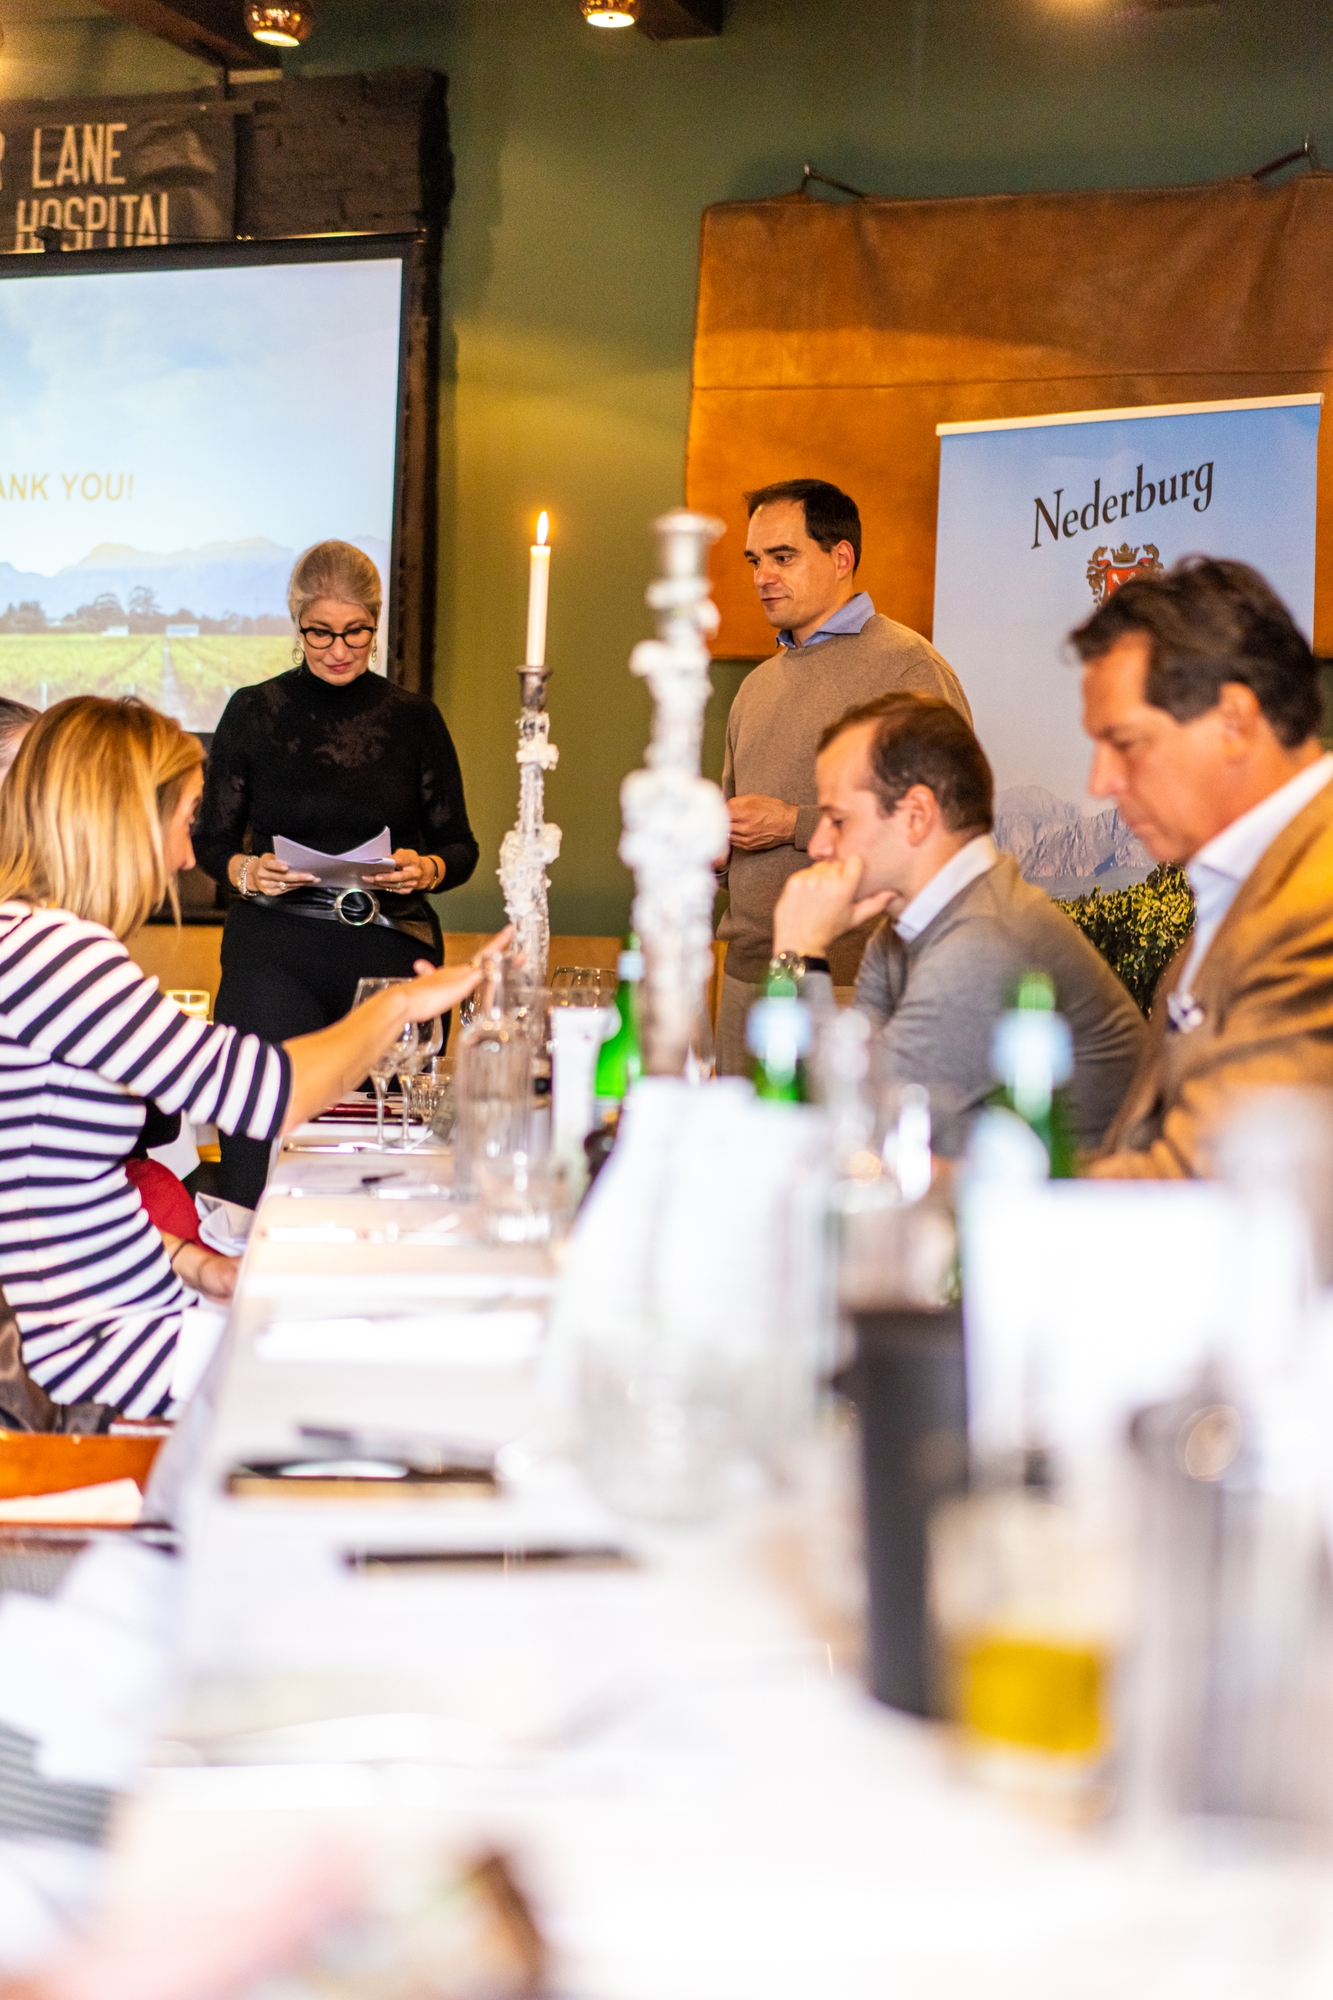 WINEMAKERS LUNCH DISTELL: ÉÉN GROOT SUCCES